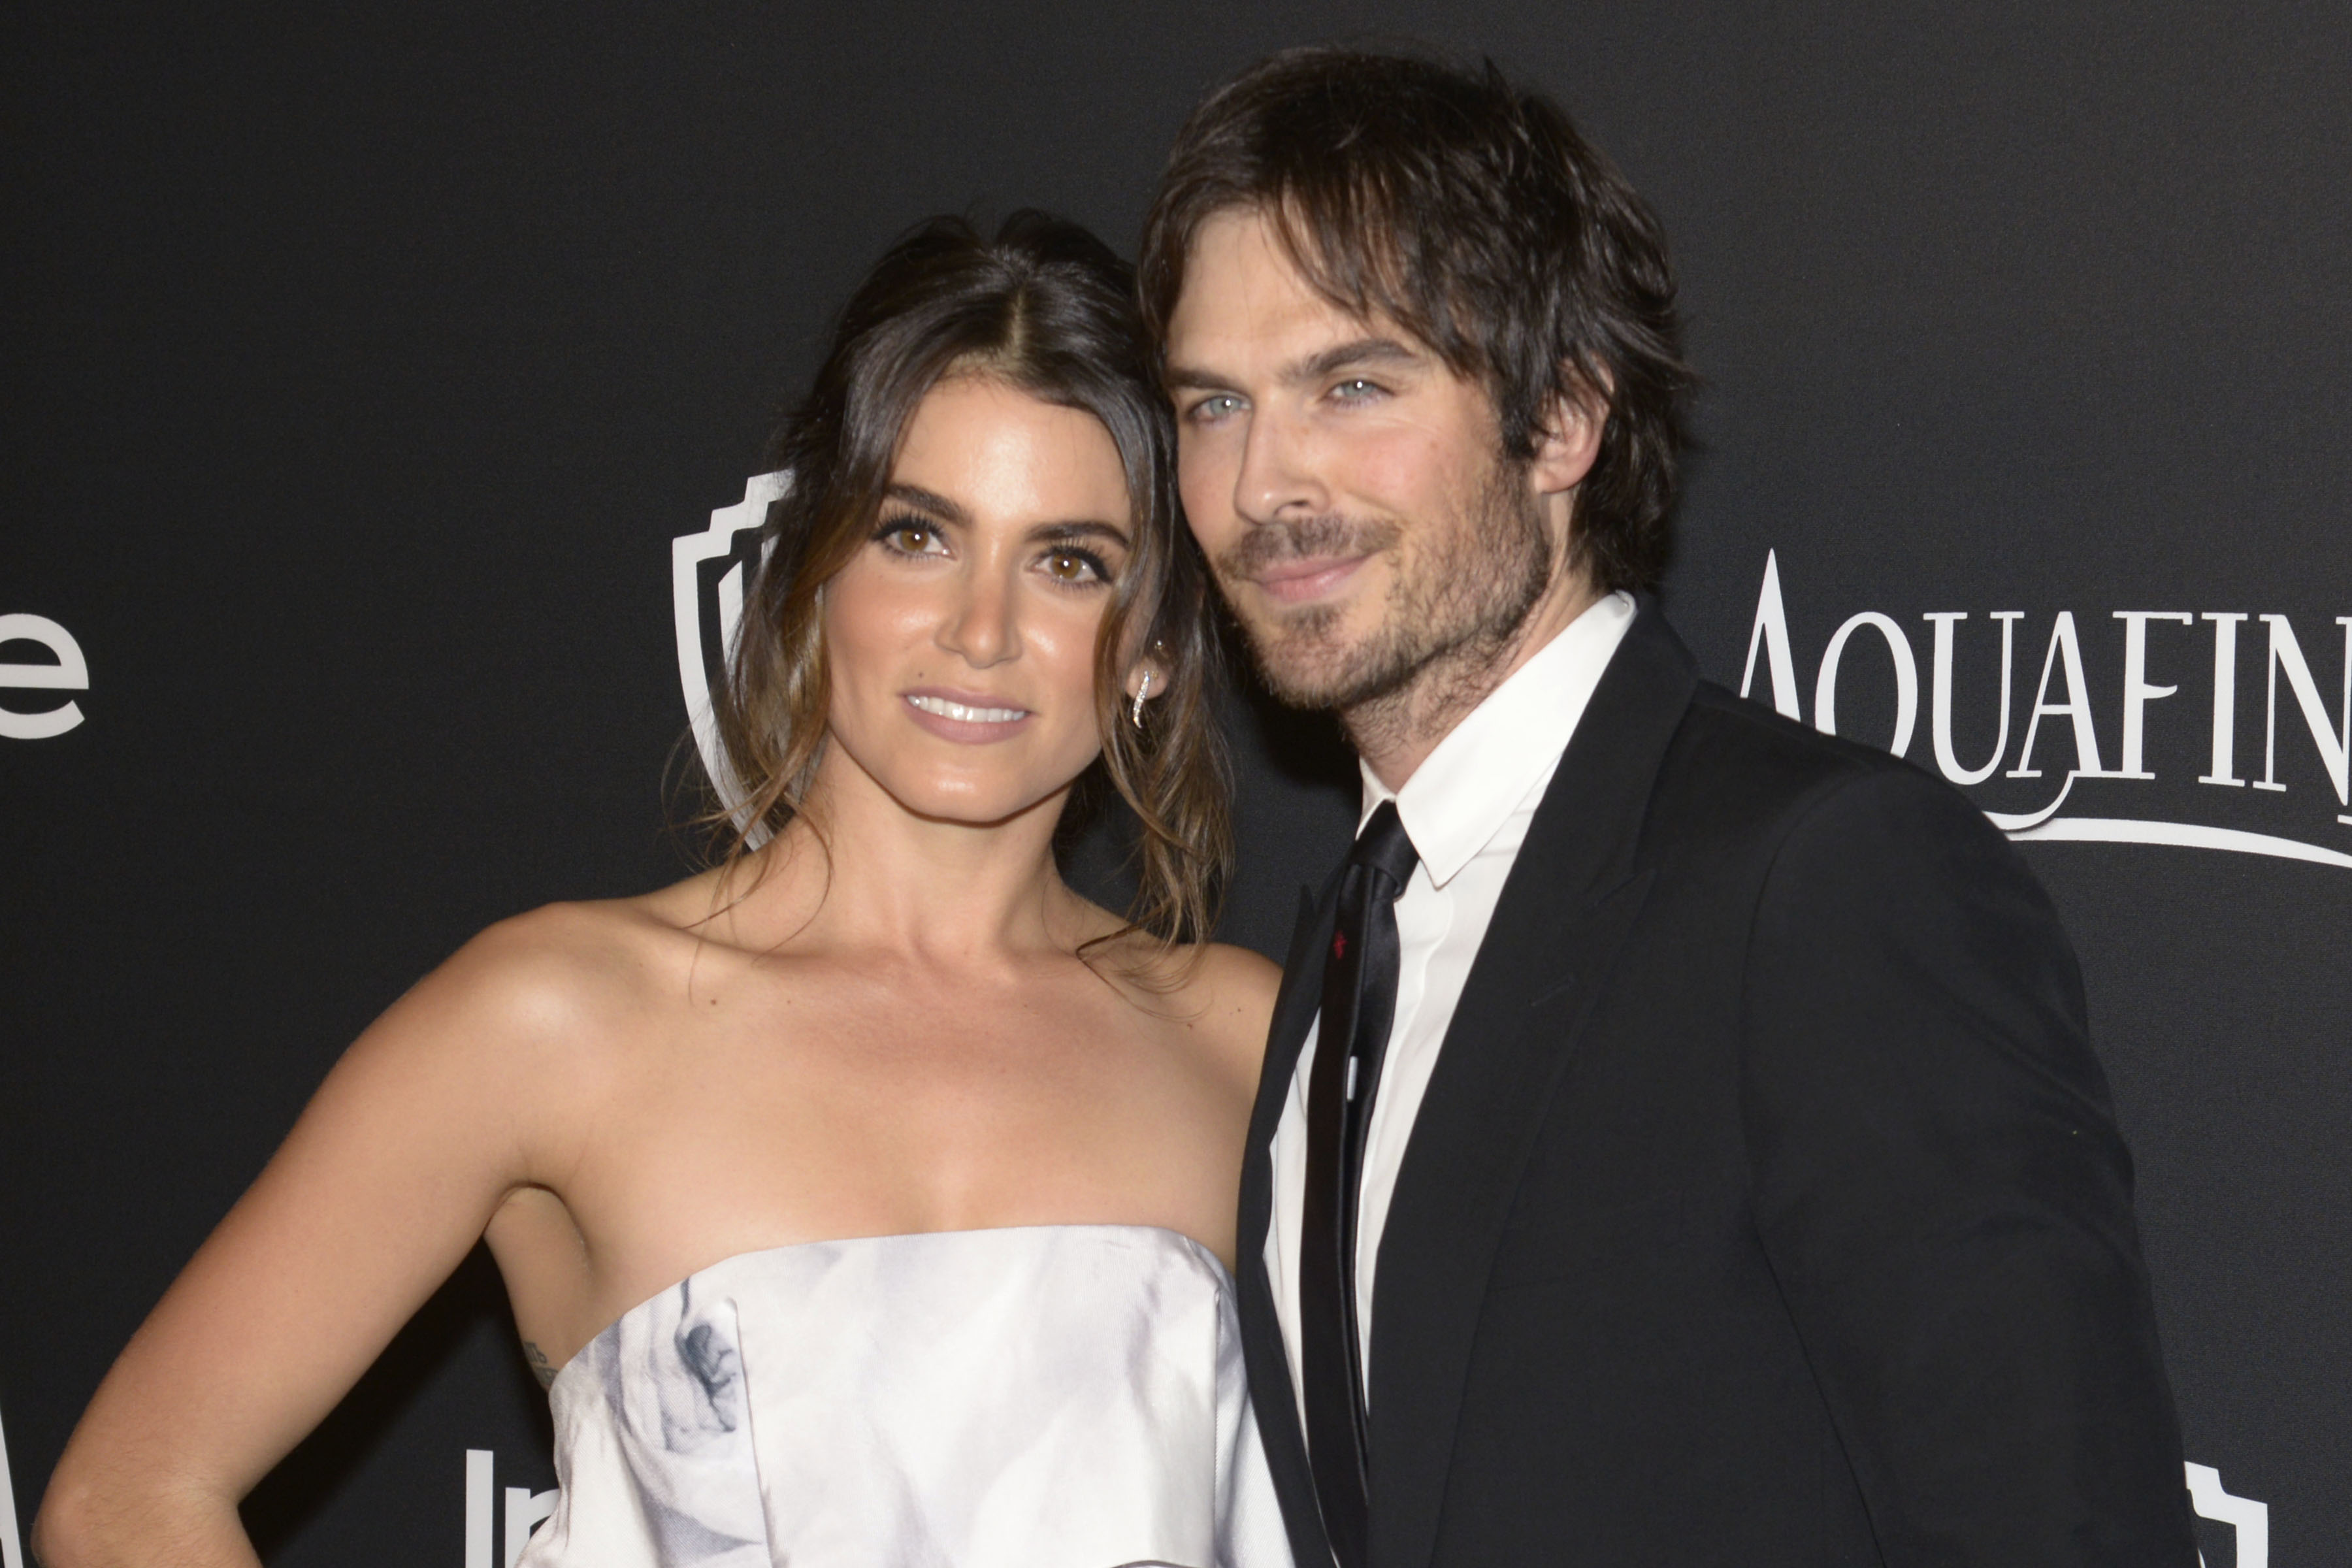 Nikki Reed and Ian Somerhalder at the InStyle and Warner Bros. Golden Globe Awards after party held at the Beverly Hilton in Los Angeles on Jan. 11, 2015 (Daniel Torok—AP)